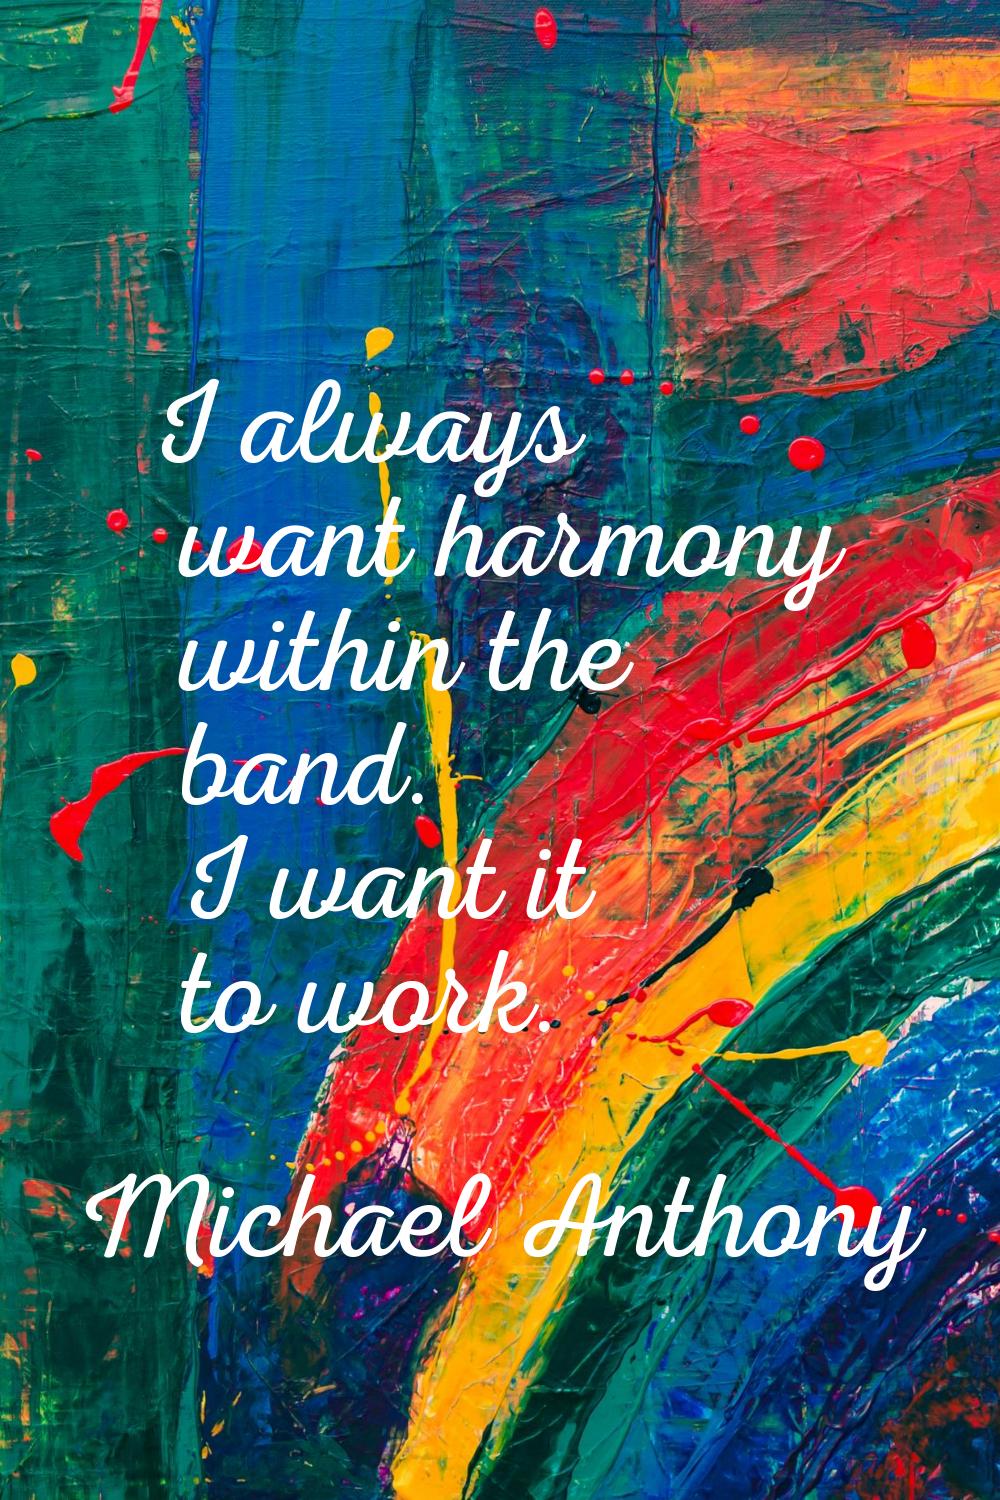 I always want harmony within the band. I want it to work.